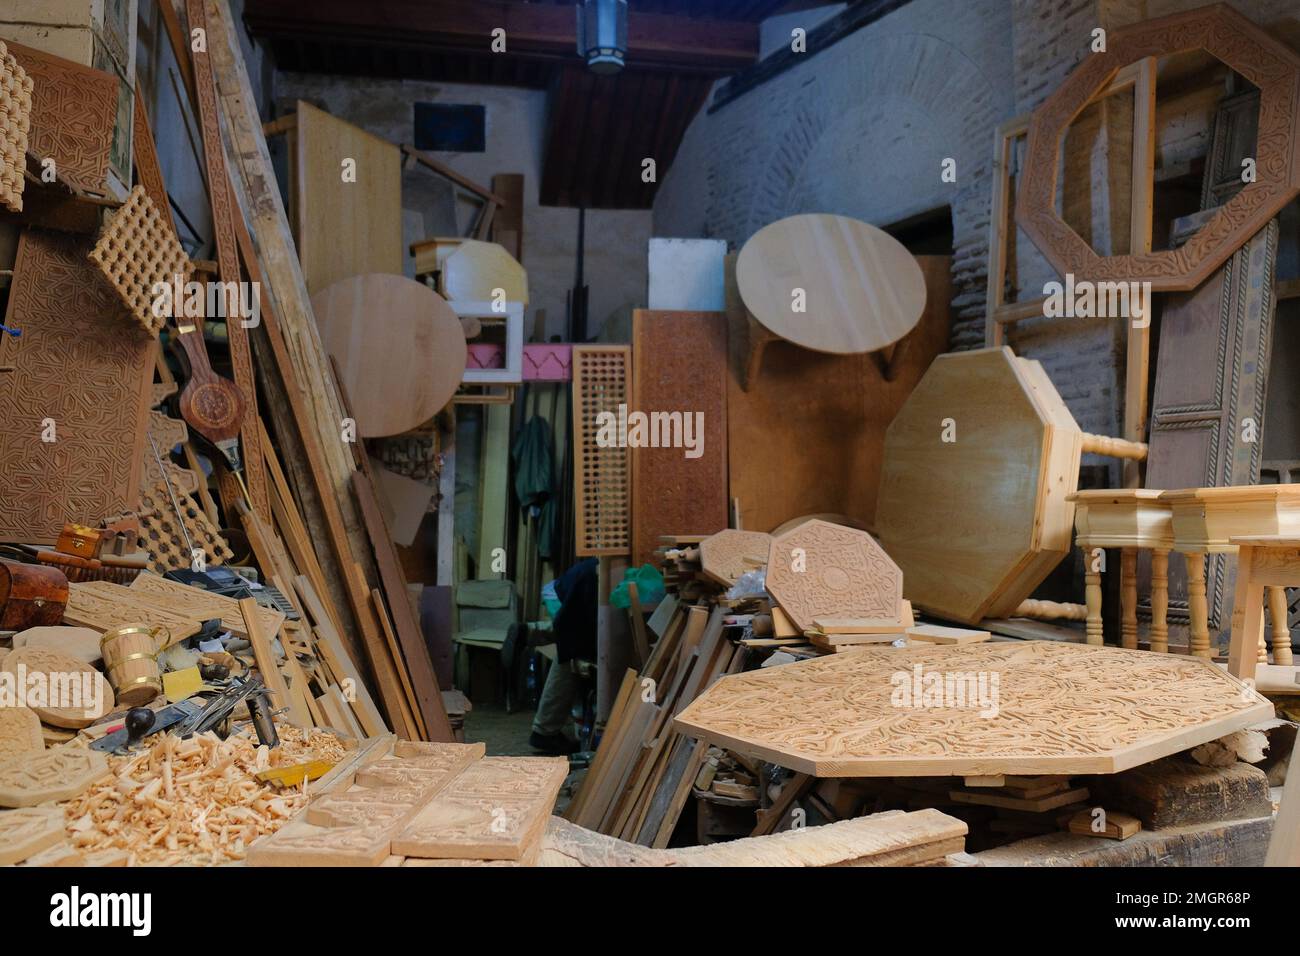 Fez, Morocco - carpenter's shop in Fes el Bali medina. Work in progress at a woodshop. Octagon tabletop with carving. Wood shavings on the side. Stock Photo